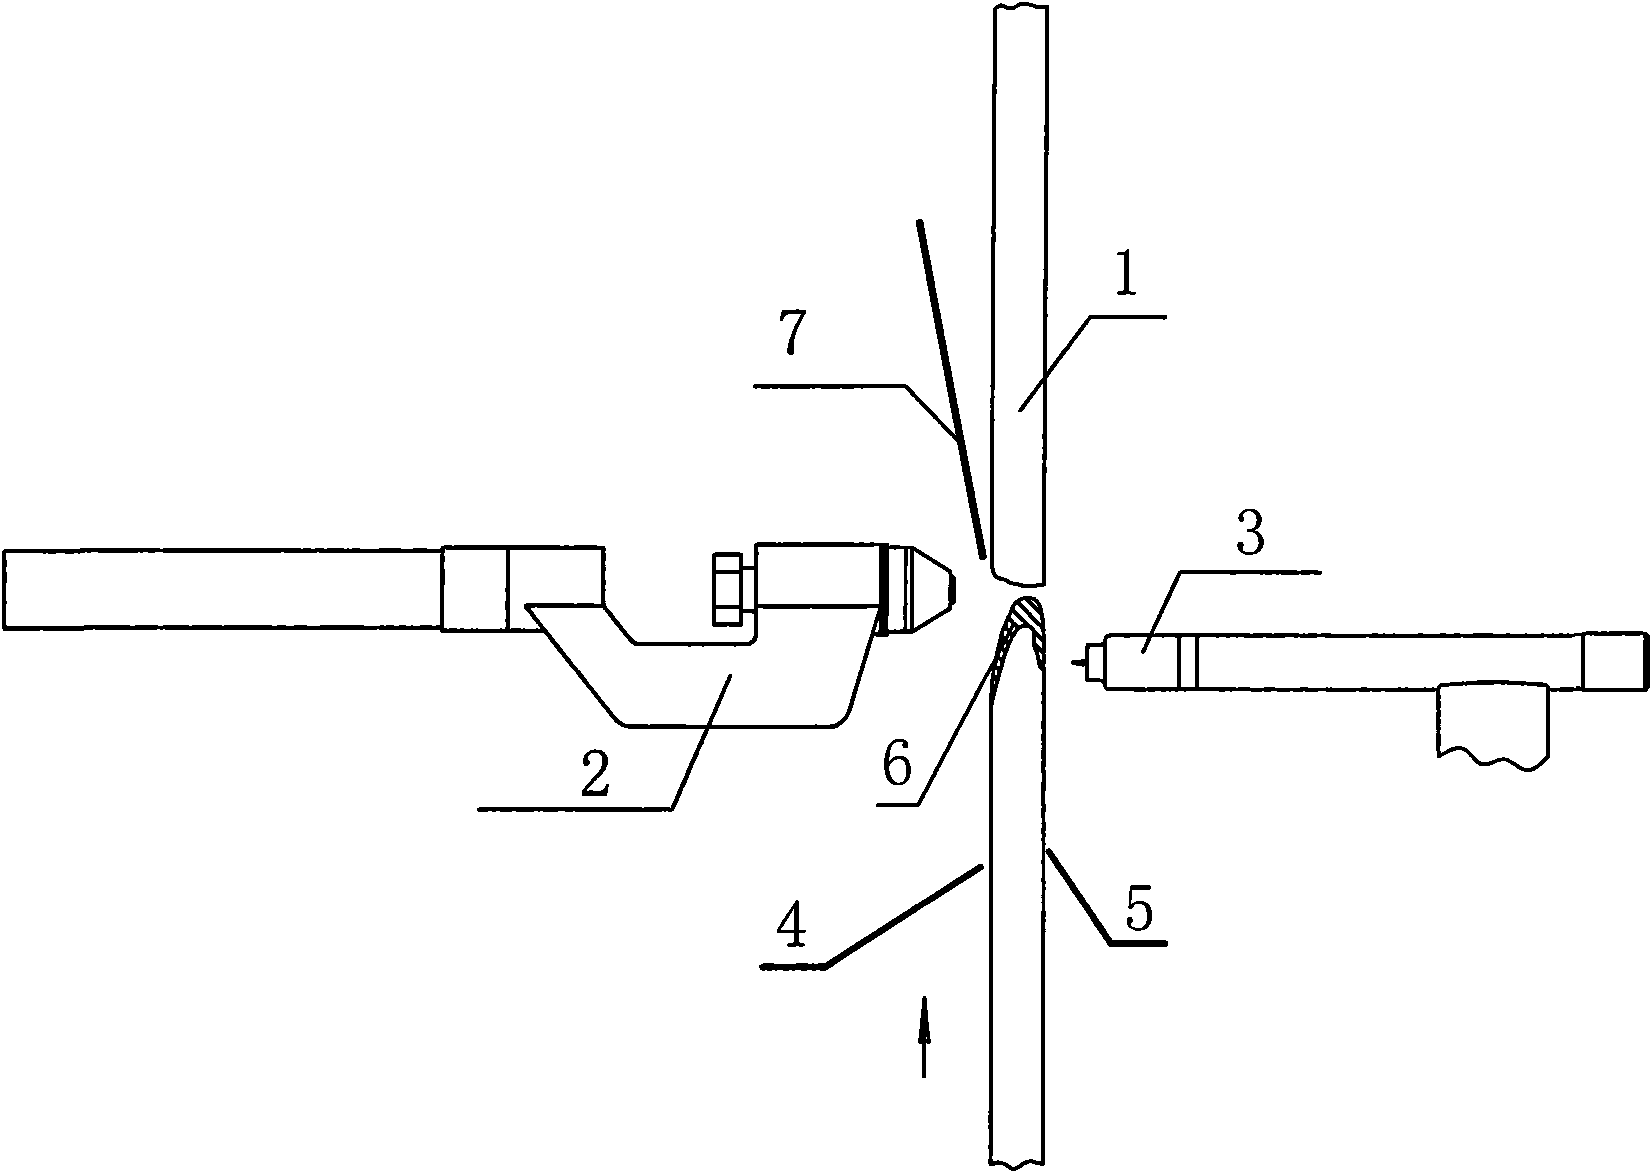 Method for vertical double-sided double-arc plasma symmetry welding